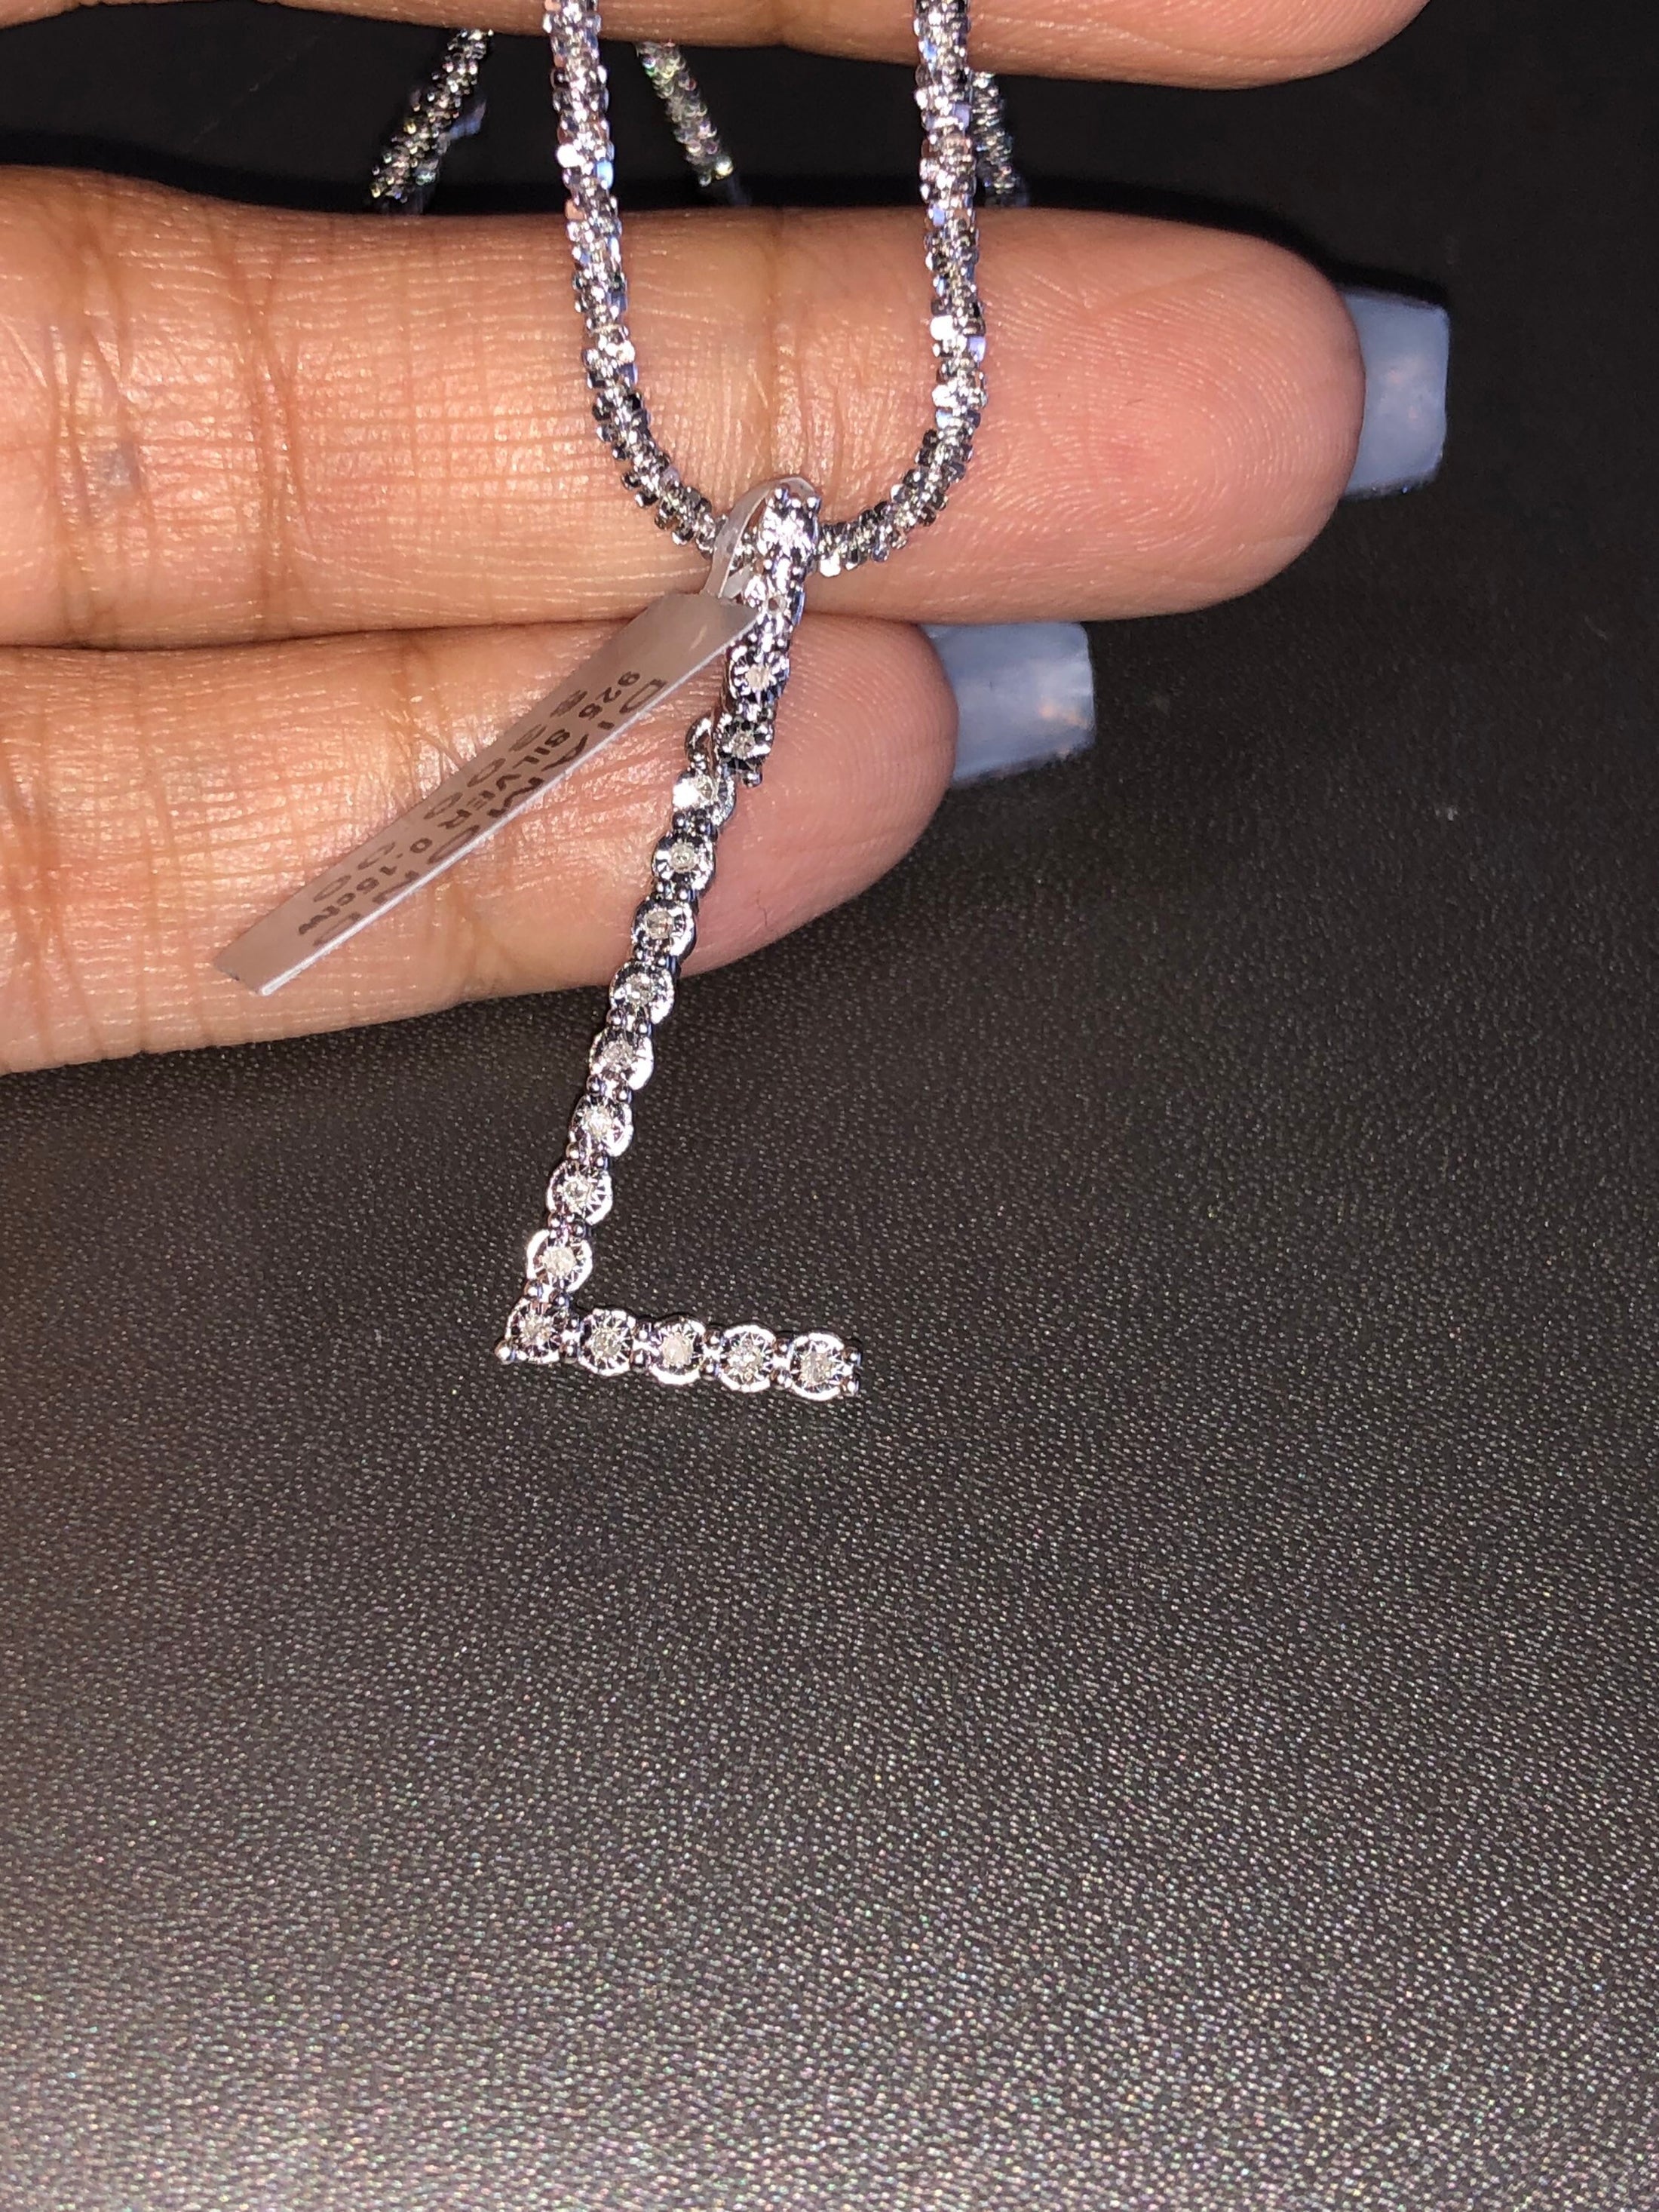 L initial Real Diamond letter pendant charm w/ Turkish sparkle chain not CZ not moissanite not lab made beautiful gift monogram initials